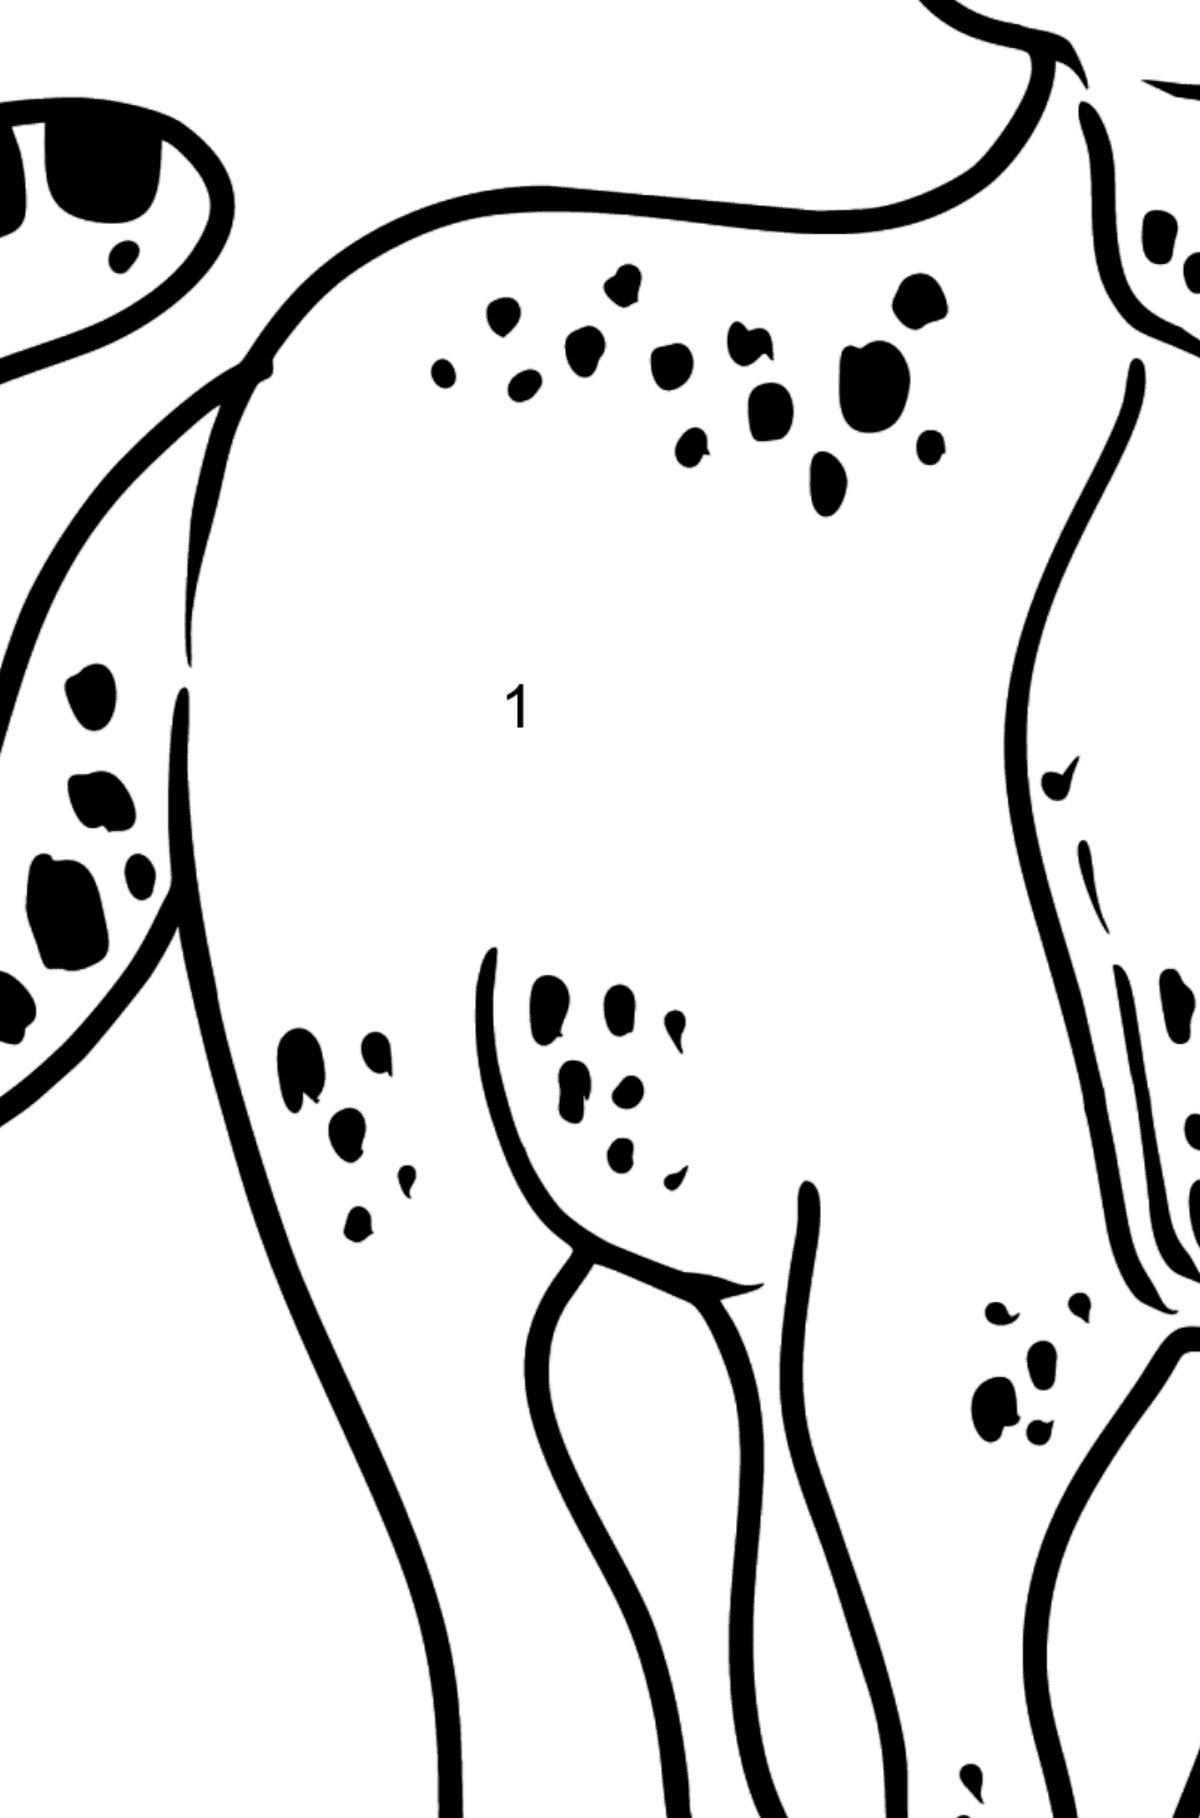 Leopard coloring page - Coloring by Numbers for Kids